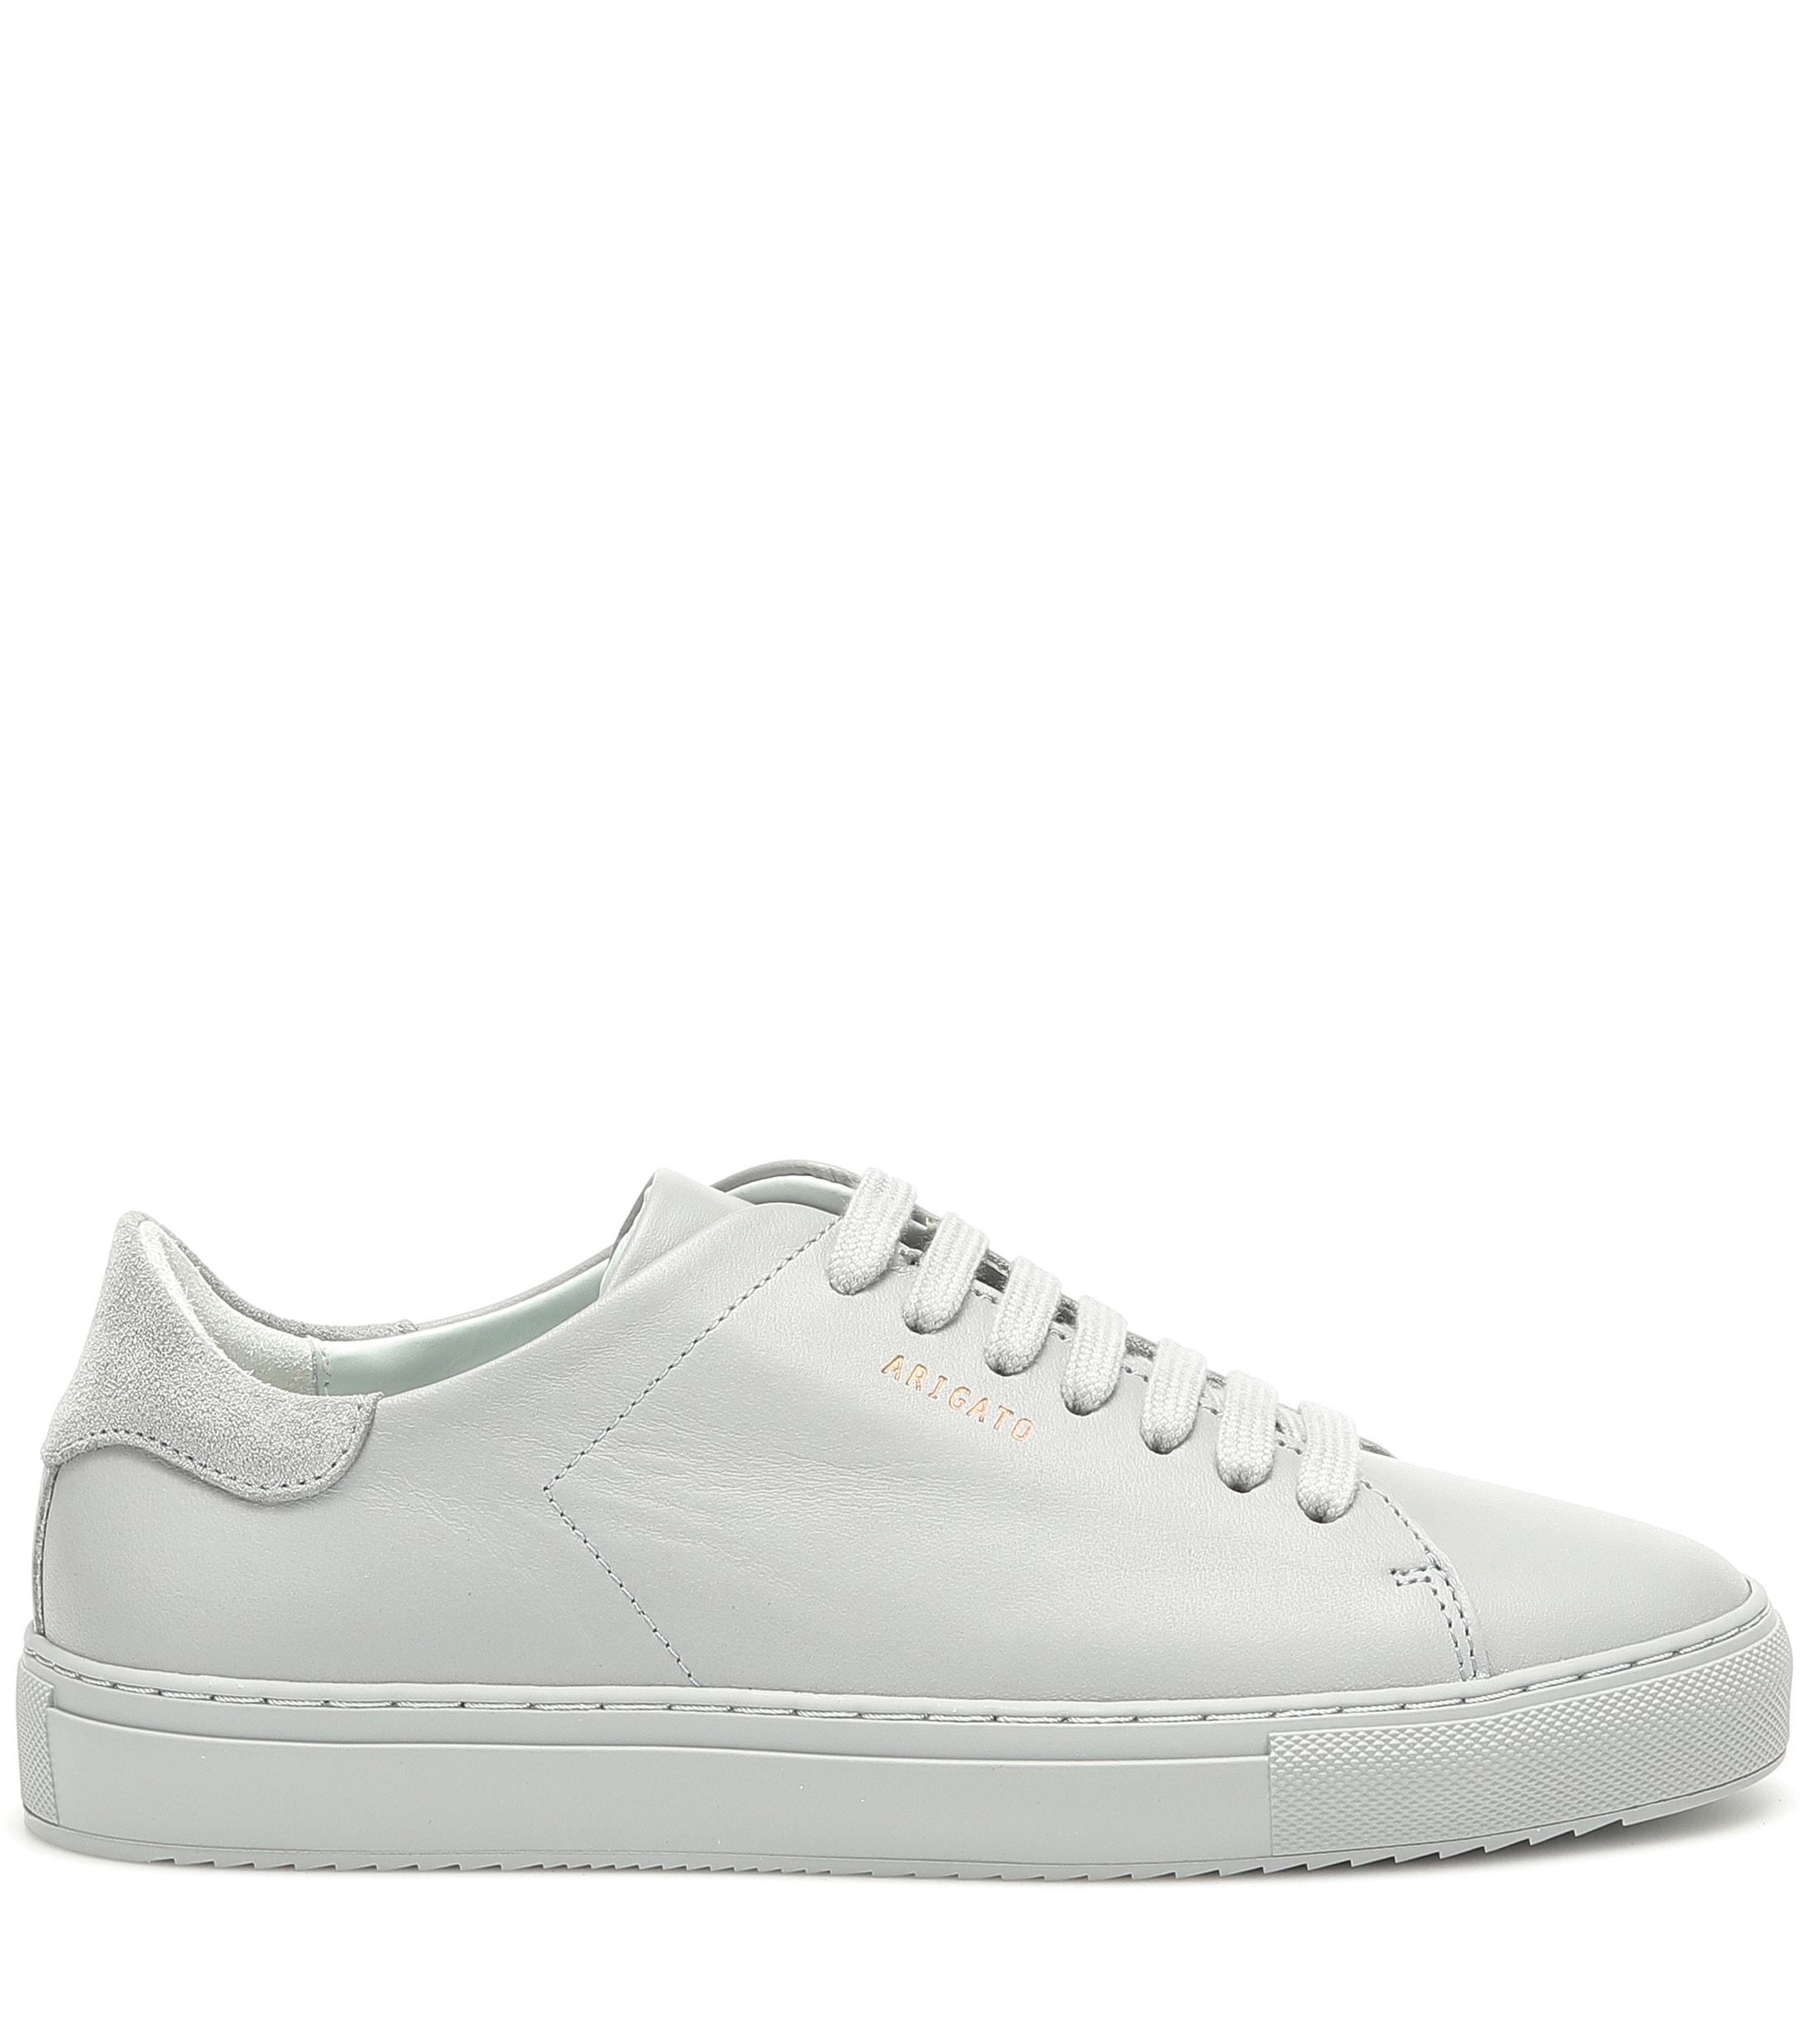 Axel Arigato Clean 90 Leather Sneakers in Grey (Gray) - Lyst